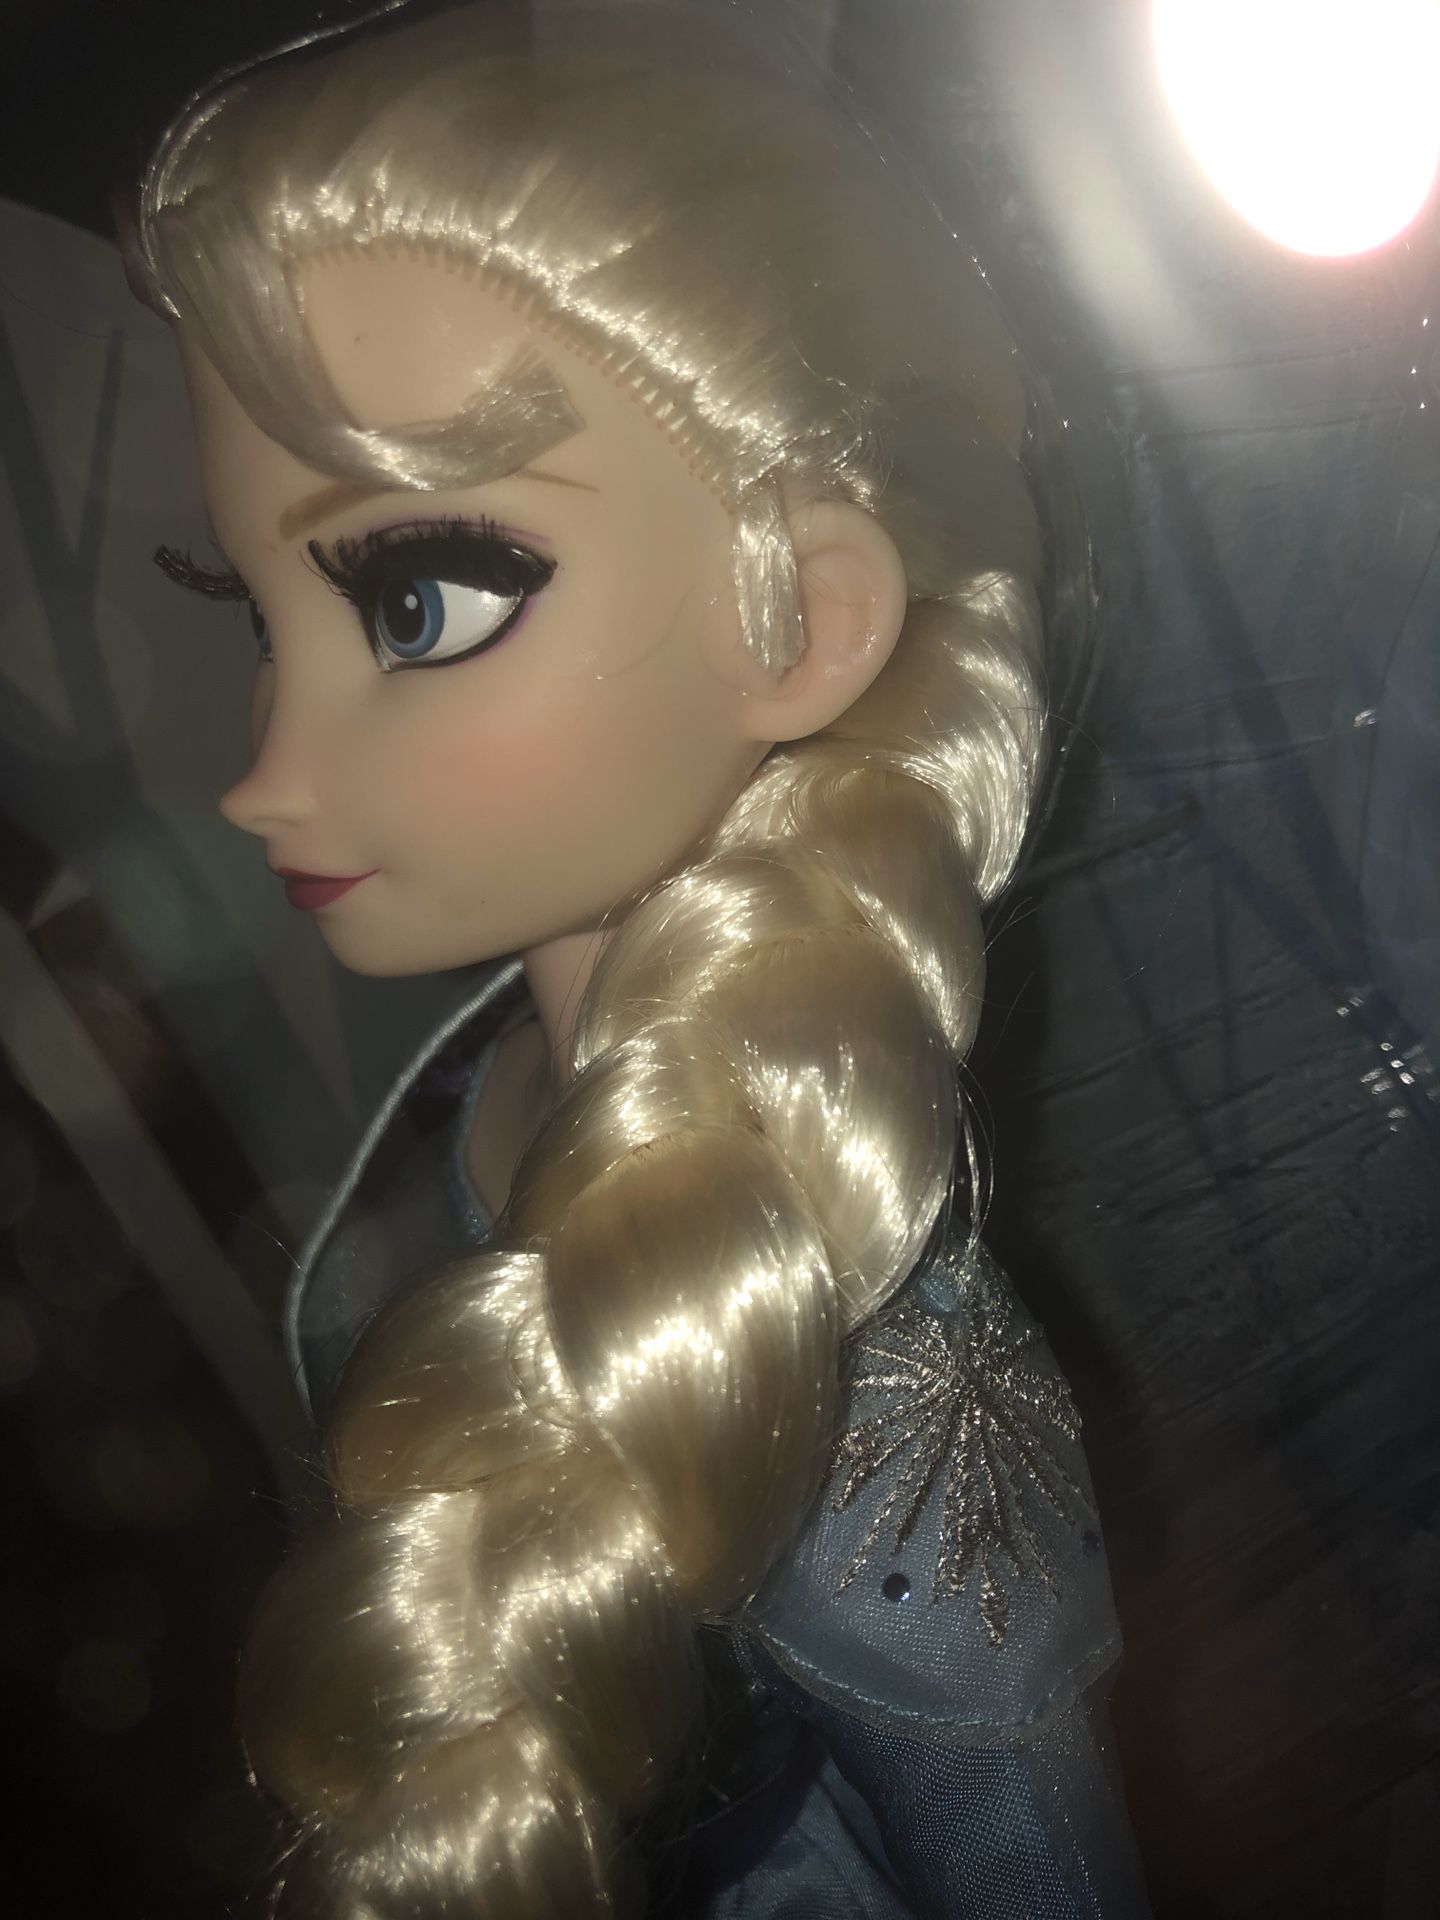 Elsa doll limited edition can negotiate price